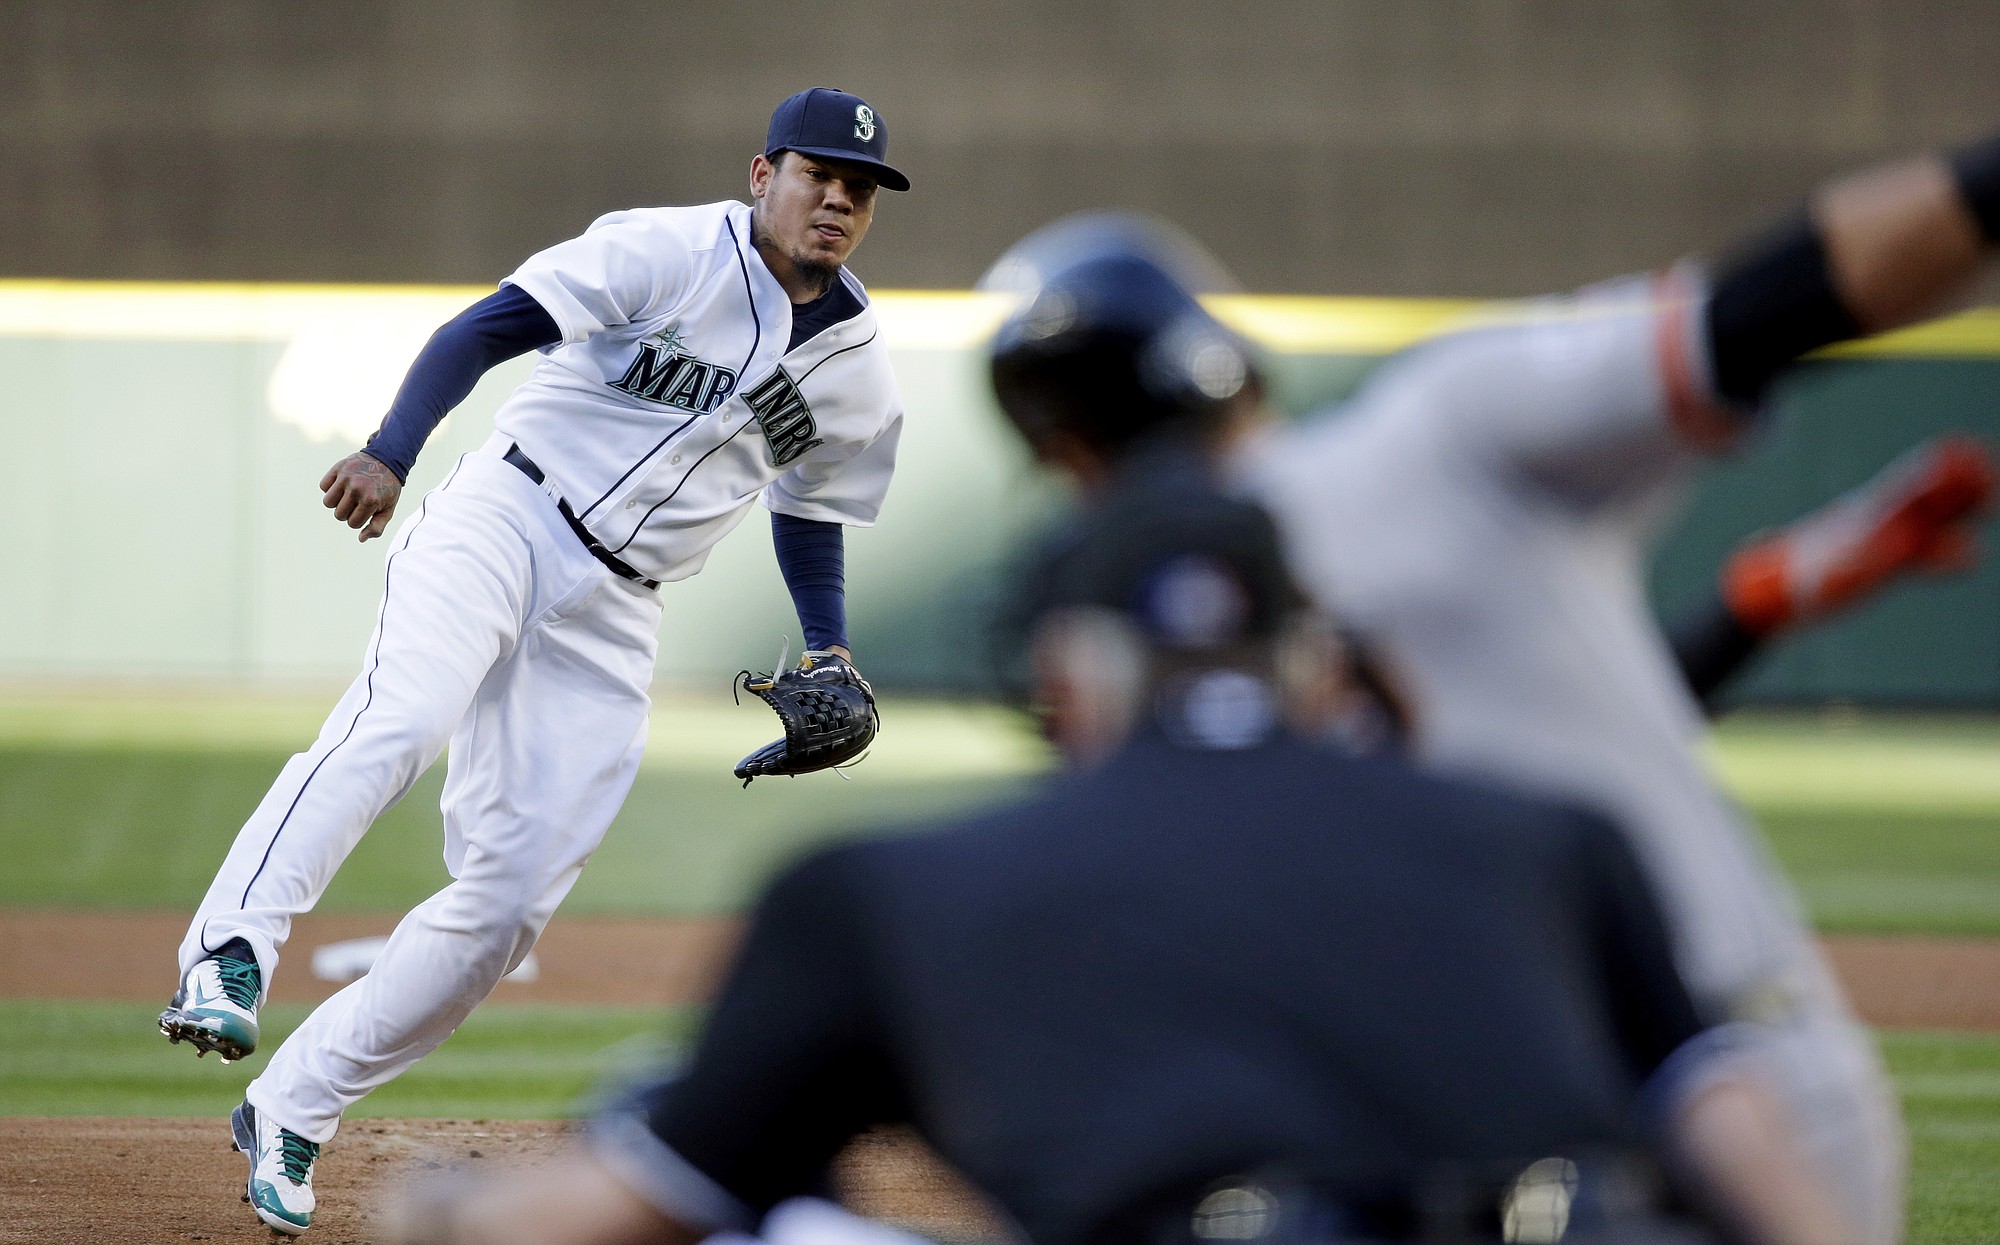 Seattle Mariners starting pitcher Felix Hernandez, left, watches as San Francisco Giants' Joe Panik swings and misses to strike out during the first inning Wednesday, June 17, 2015, in Seattle.